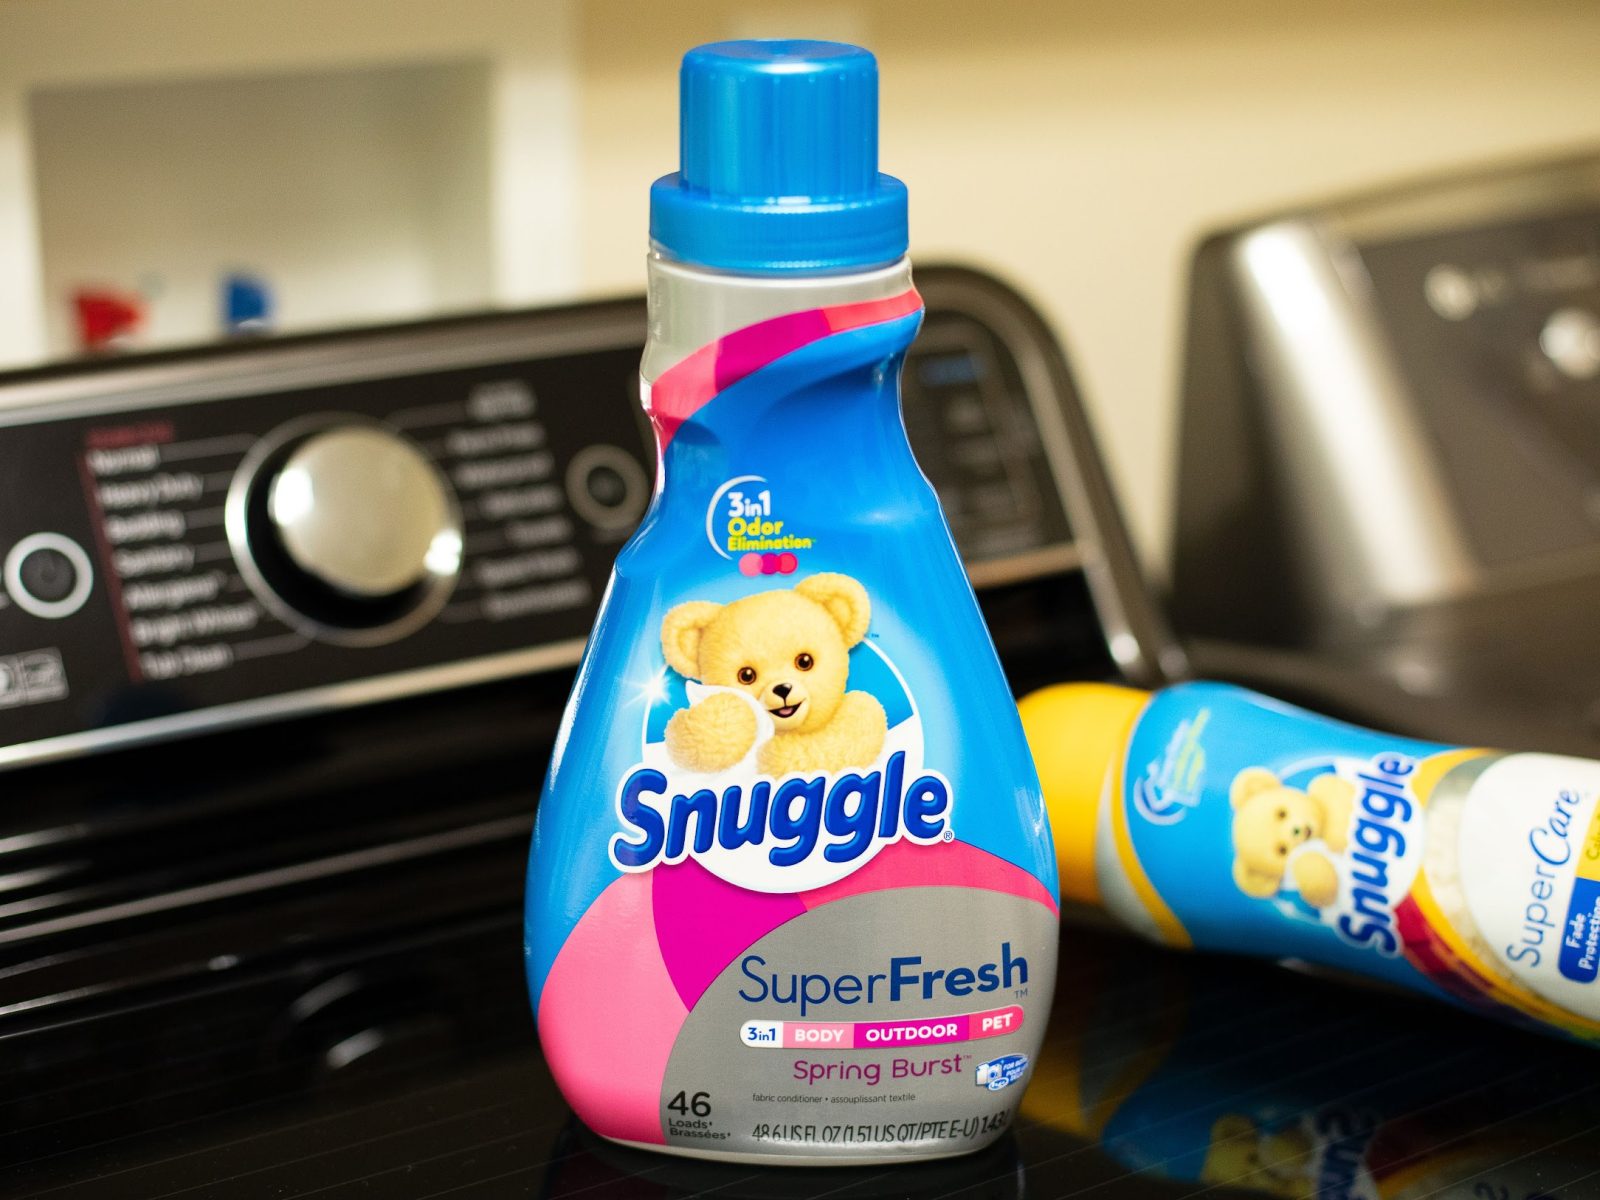 New Snuggle Fabric Softener Coupon For The Publix BOGO – Pick Up A Bottle As Low As $1.85